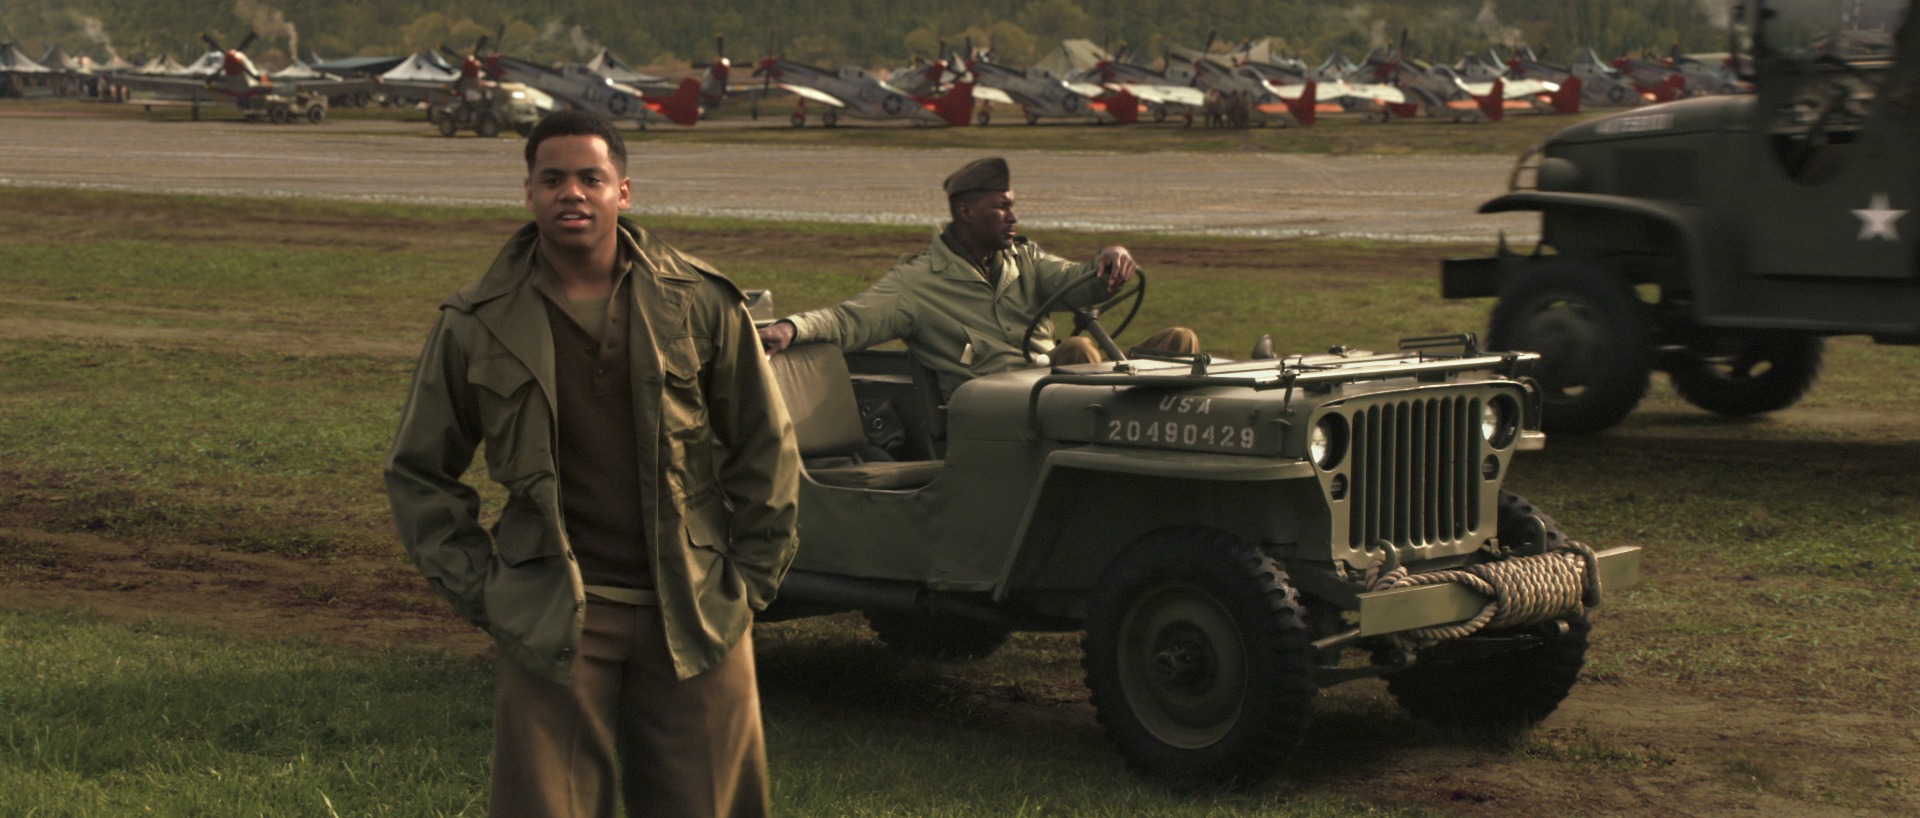 Tristan Wilds(left) & James Weston II (right) in the movie 